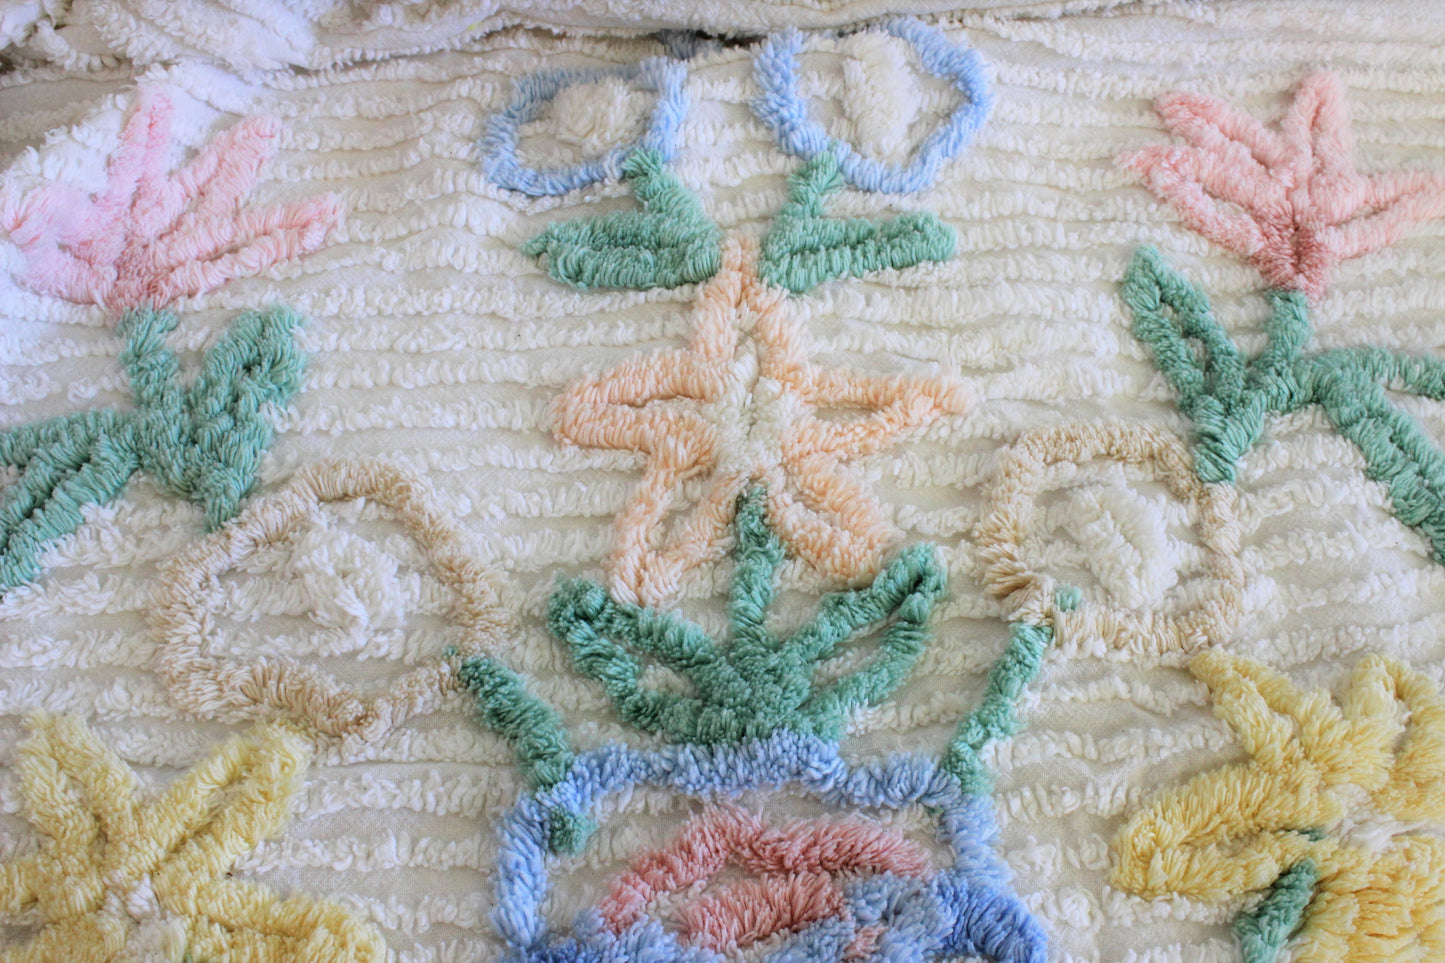 Vintage 1950s Chenille Bedspread Or Blanket, Full Or Queen Size